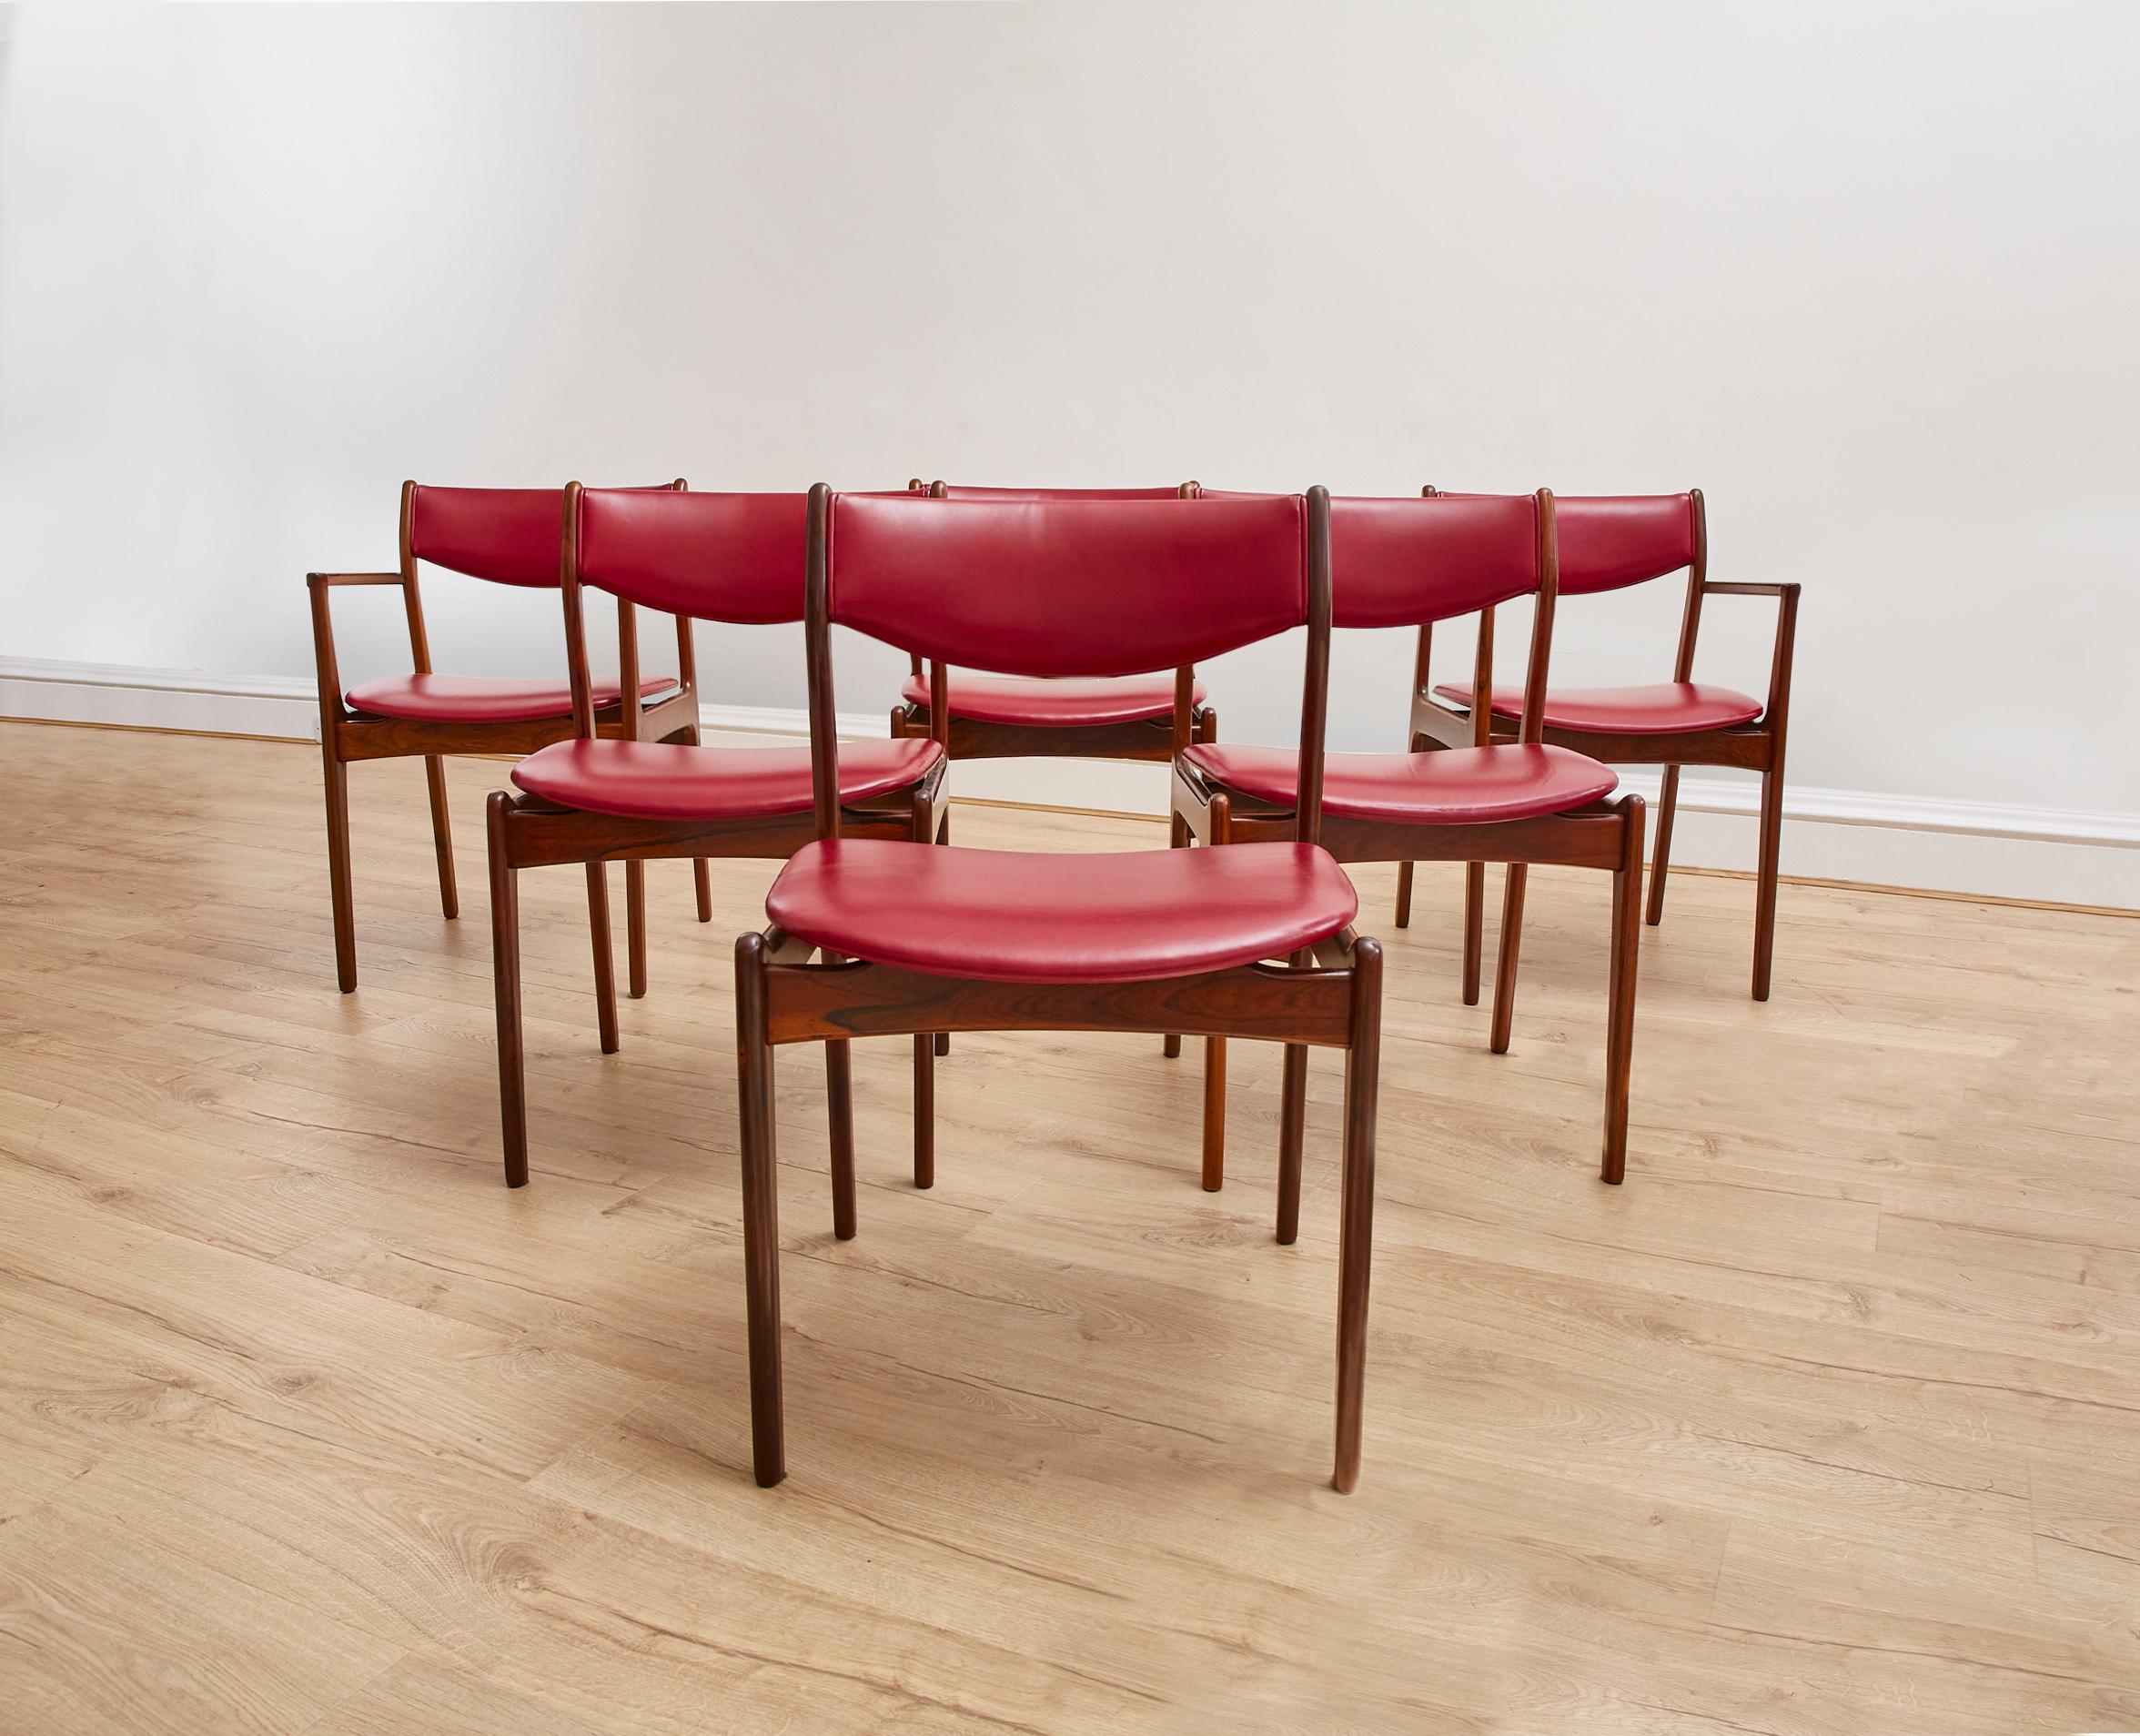 This set of 6 1960s dining chairs (4 chairs, 2 carvers) are in superb condition. The burgundy leather upholstery and dark rosewood finish are a sophisticated look to adorn a dining room.